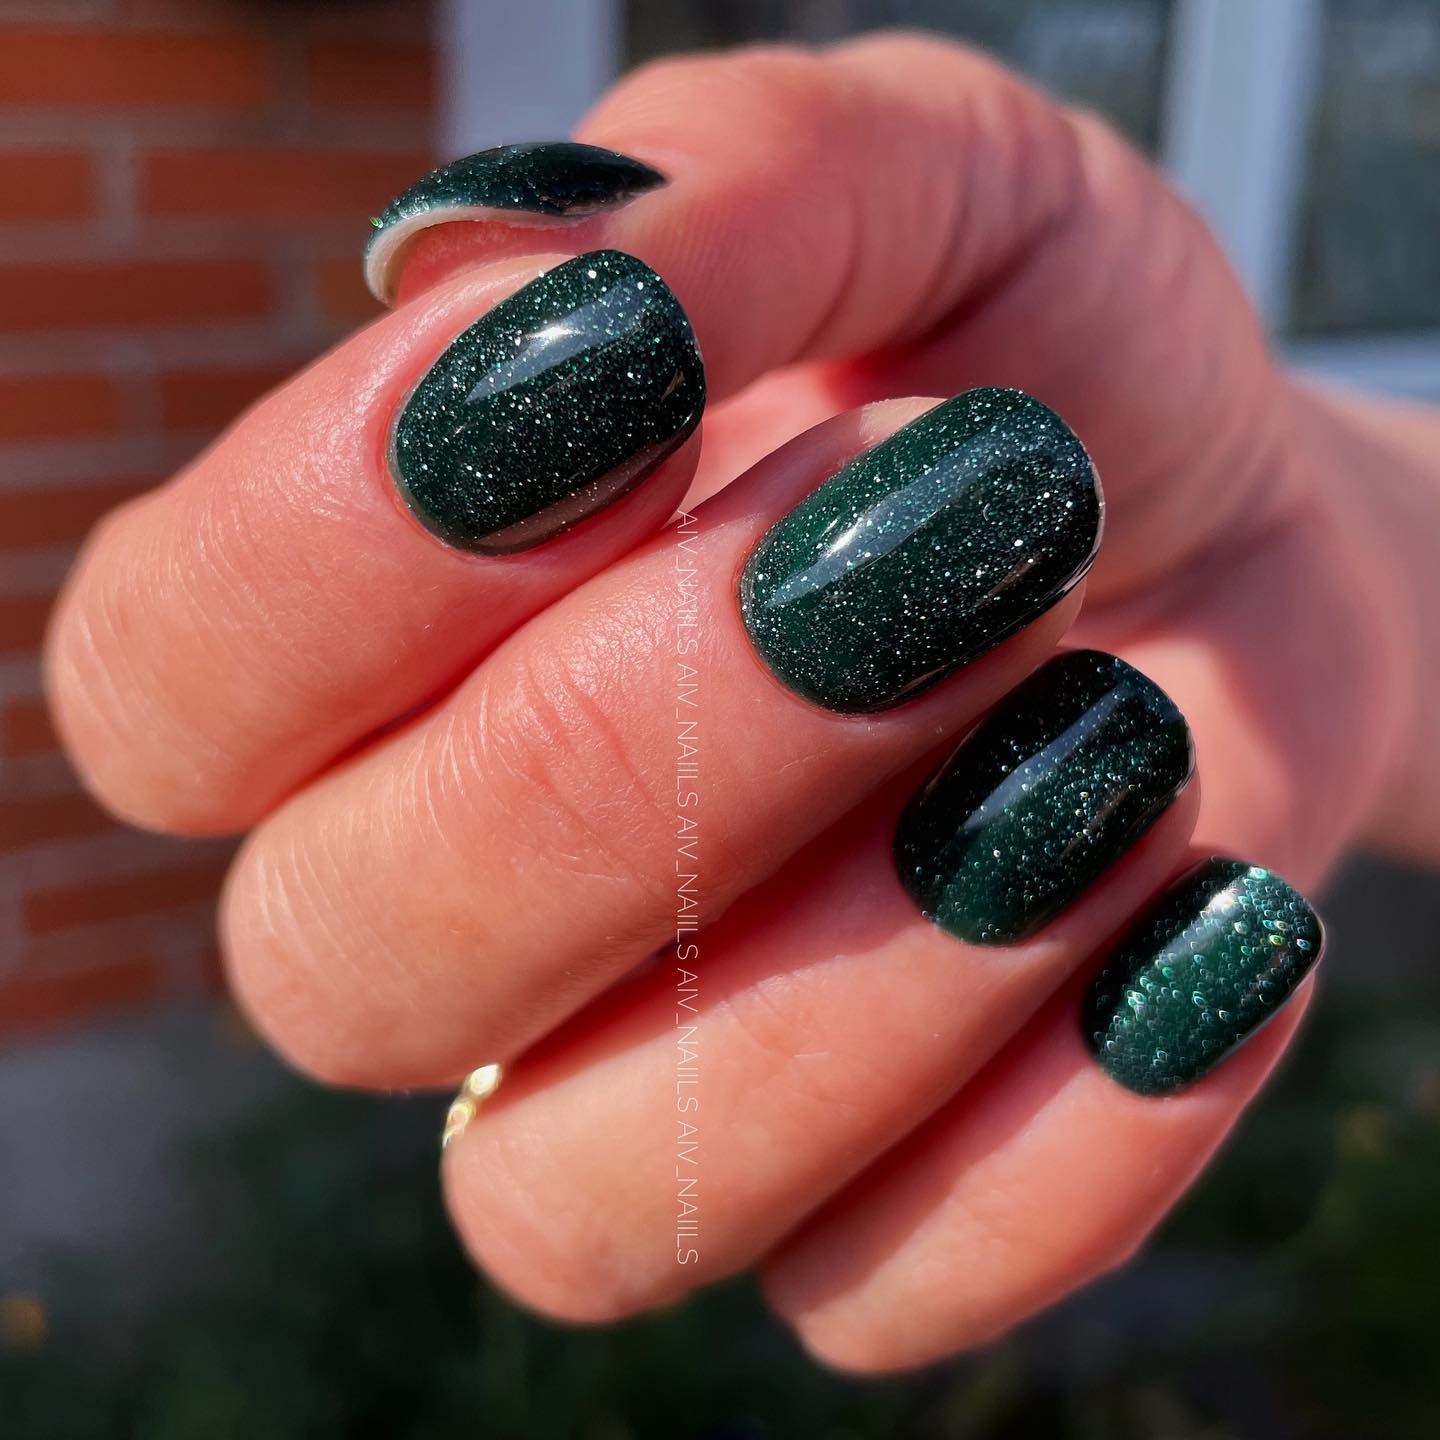 Check Out The Latest Collection Of Green Nail Polishes From ILMP